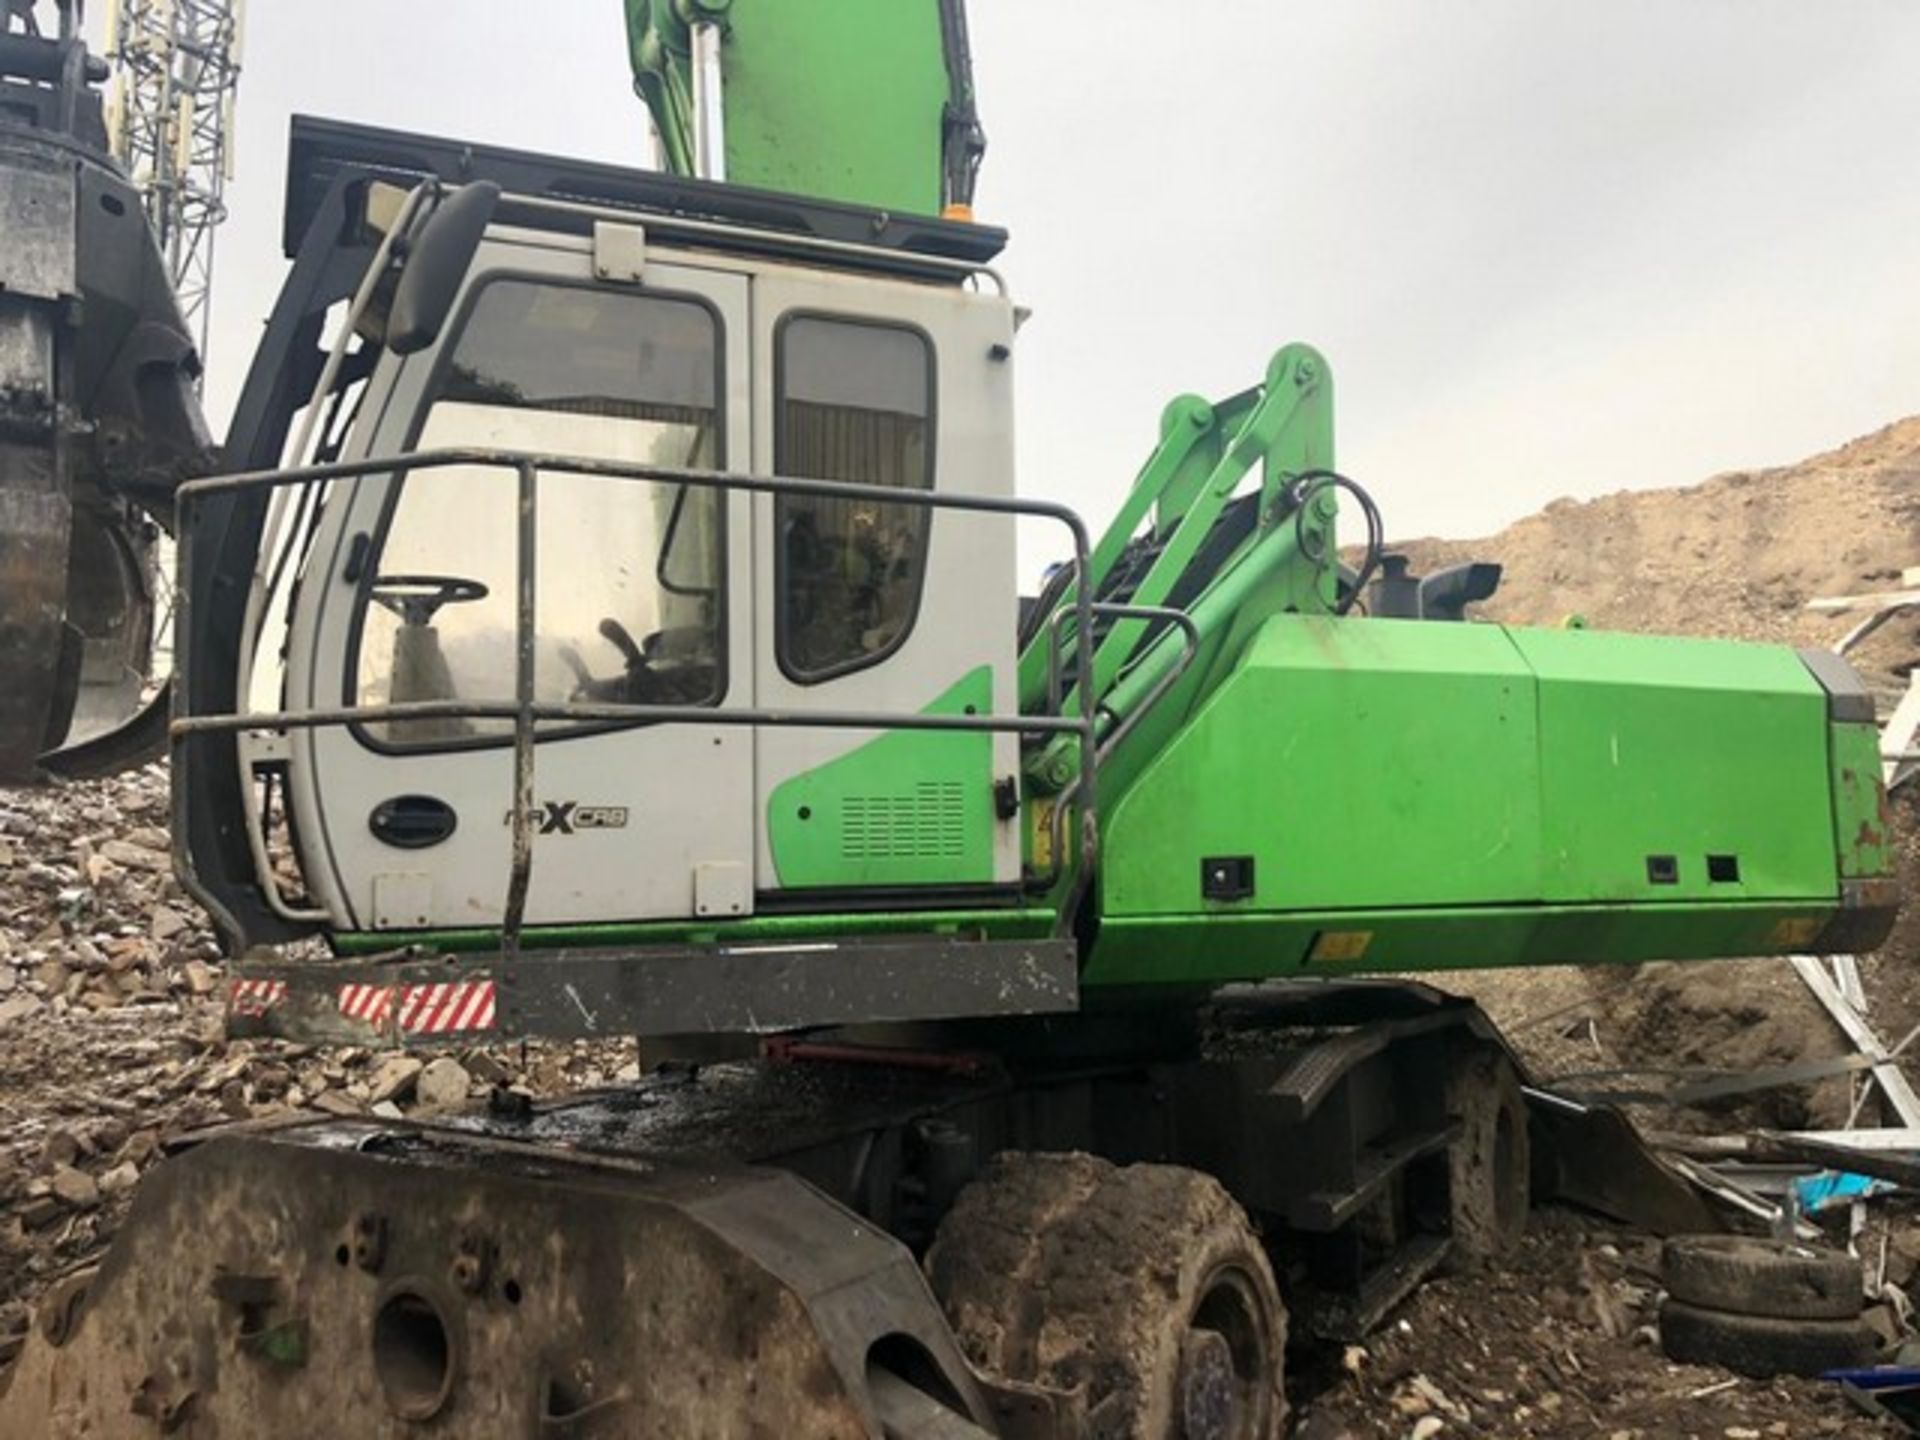 2010 SENNEBOGGEN 830m GREEN LINE MATERIAL HANDLER - 5 TINE GRAB WITH MAGNET GEAR - 14,000 hrs 17M RE - Image 2 of 7